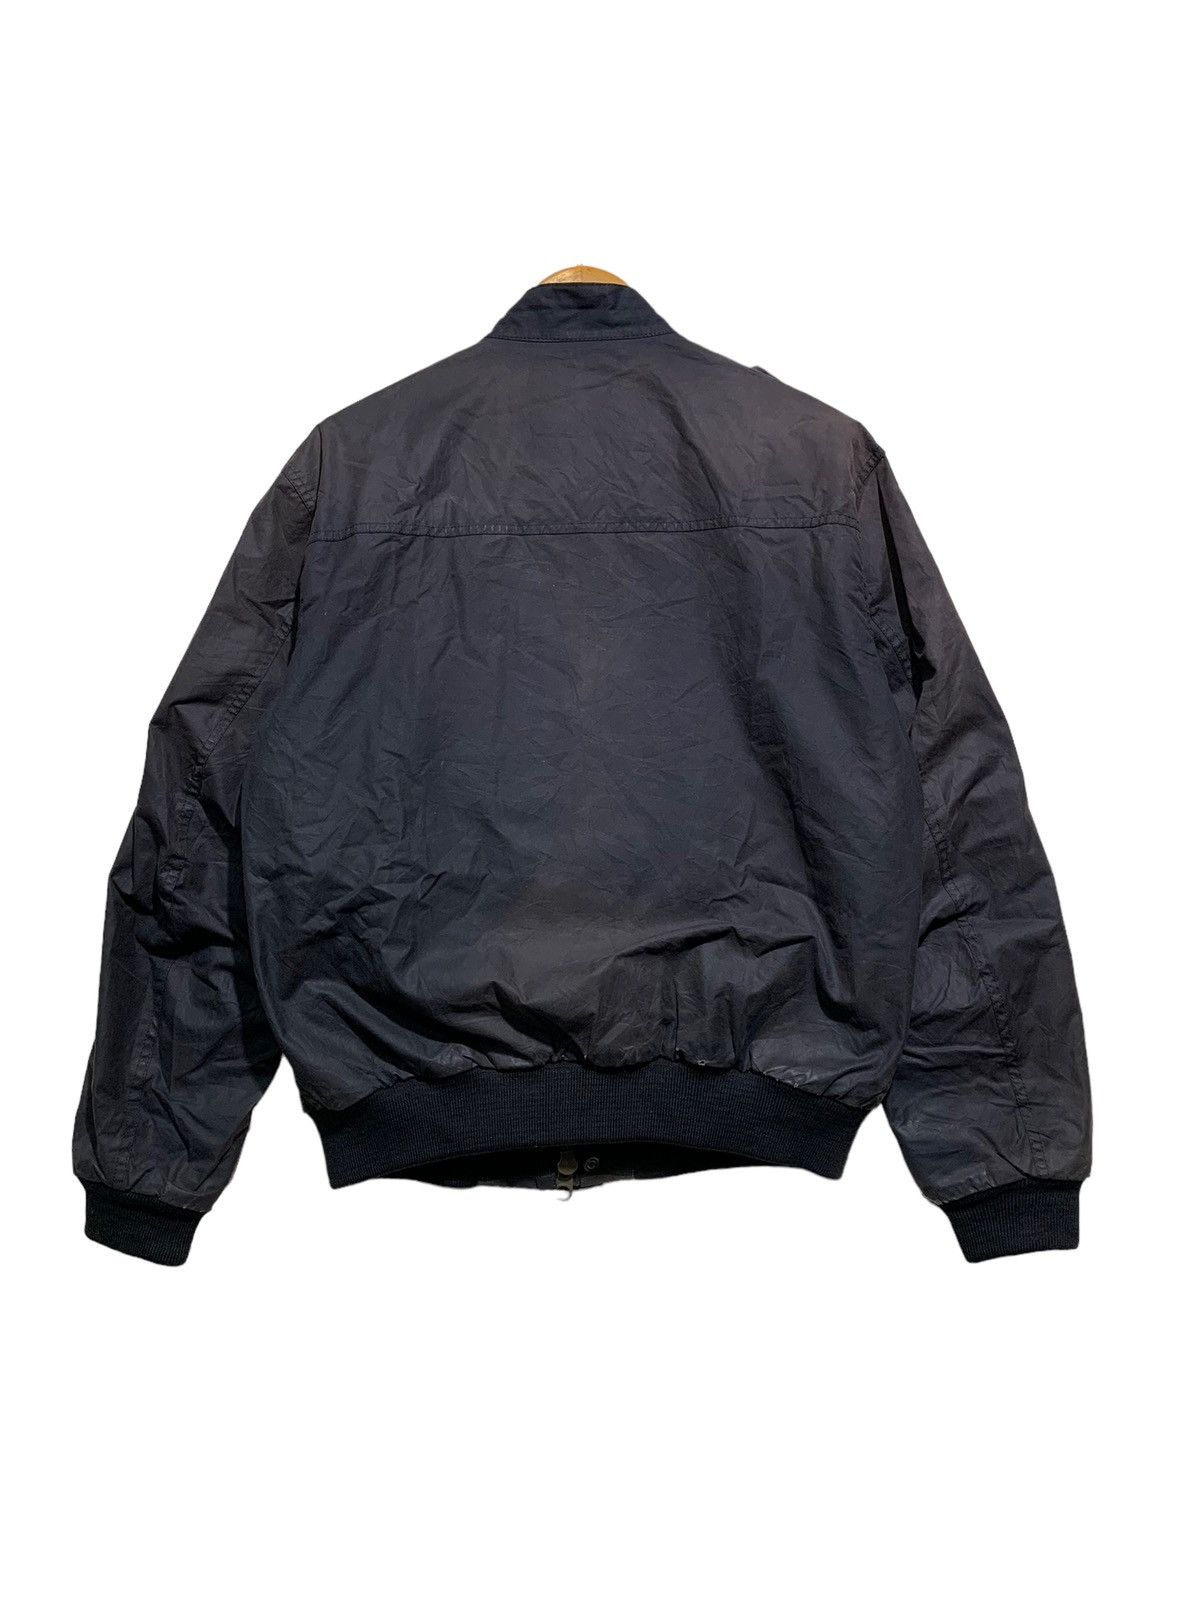 🔥BARBOUR INTERNATIONAL WAXED BOMBER JACKETS - 5